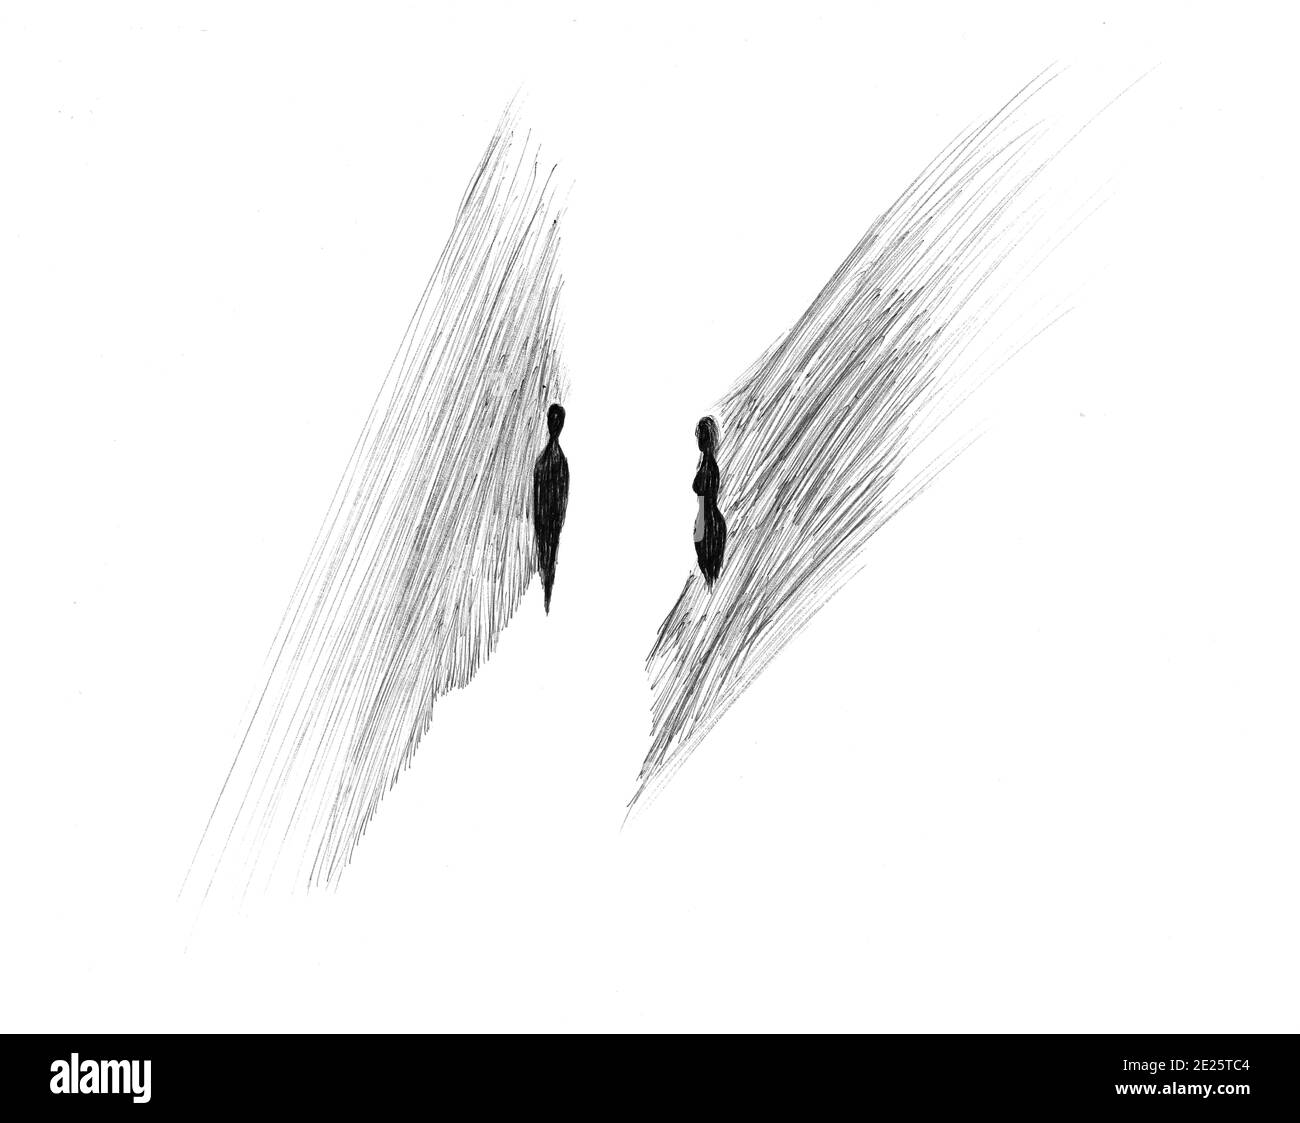 Cape Town South Africa - 13-08-2019 Ink style Illustration. Vulnerability. Man and woman hiding their shadows. Stock Photo